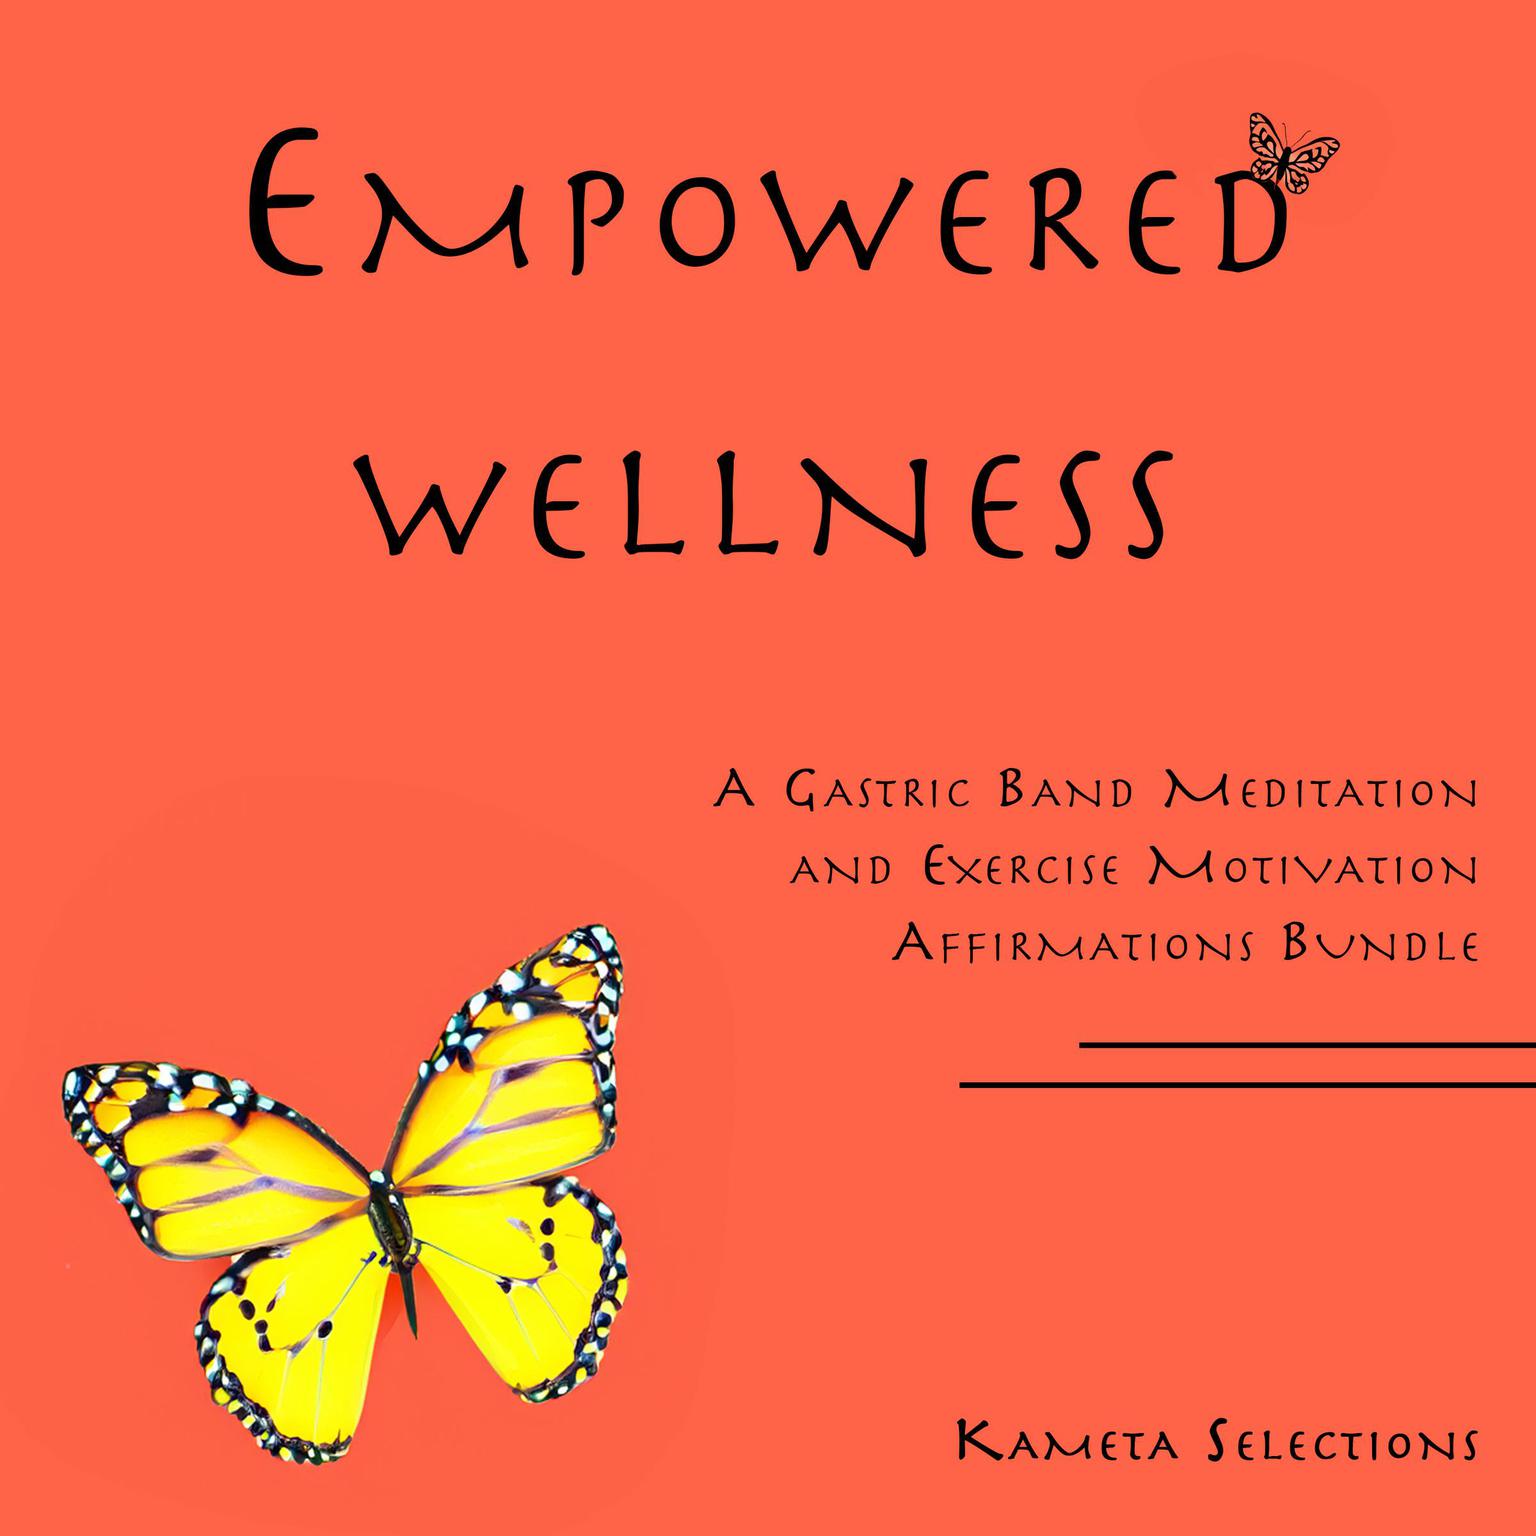 Empowered Wellness: A Gastric Band Meditation and Exercise Motivation Affirmations Bundle Audiobook, by Kameta Selections